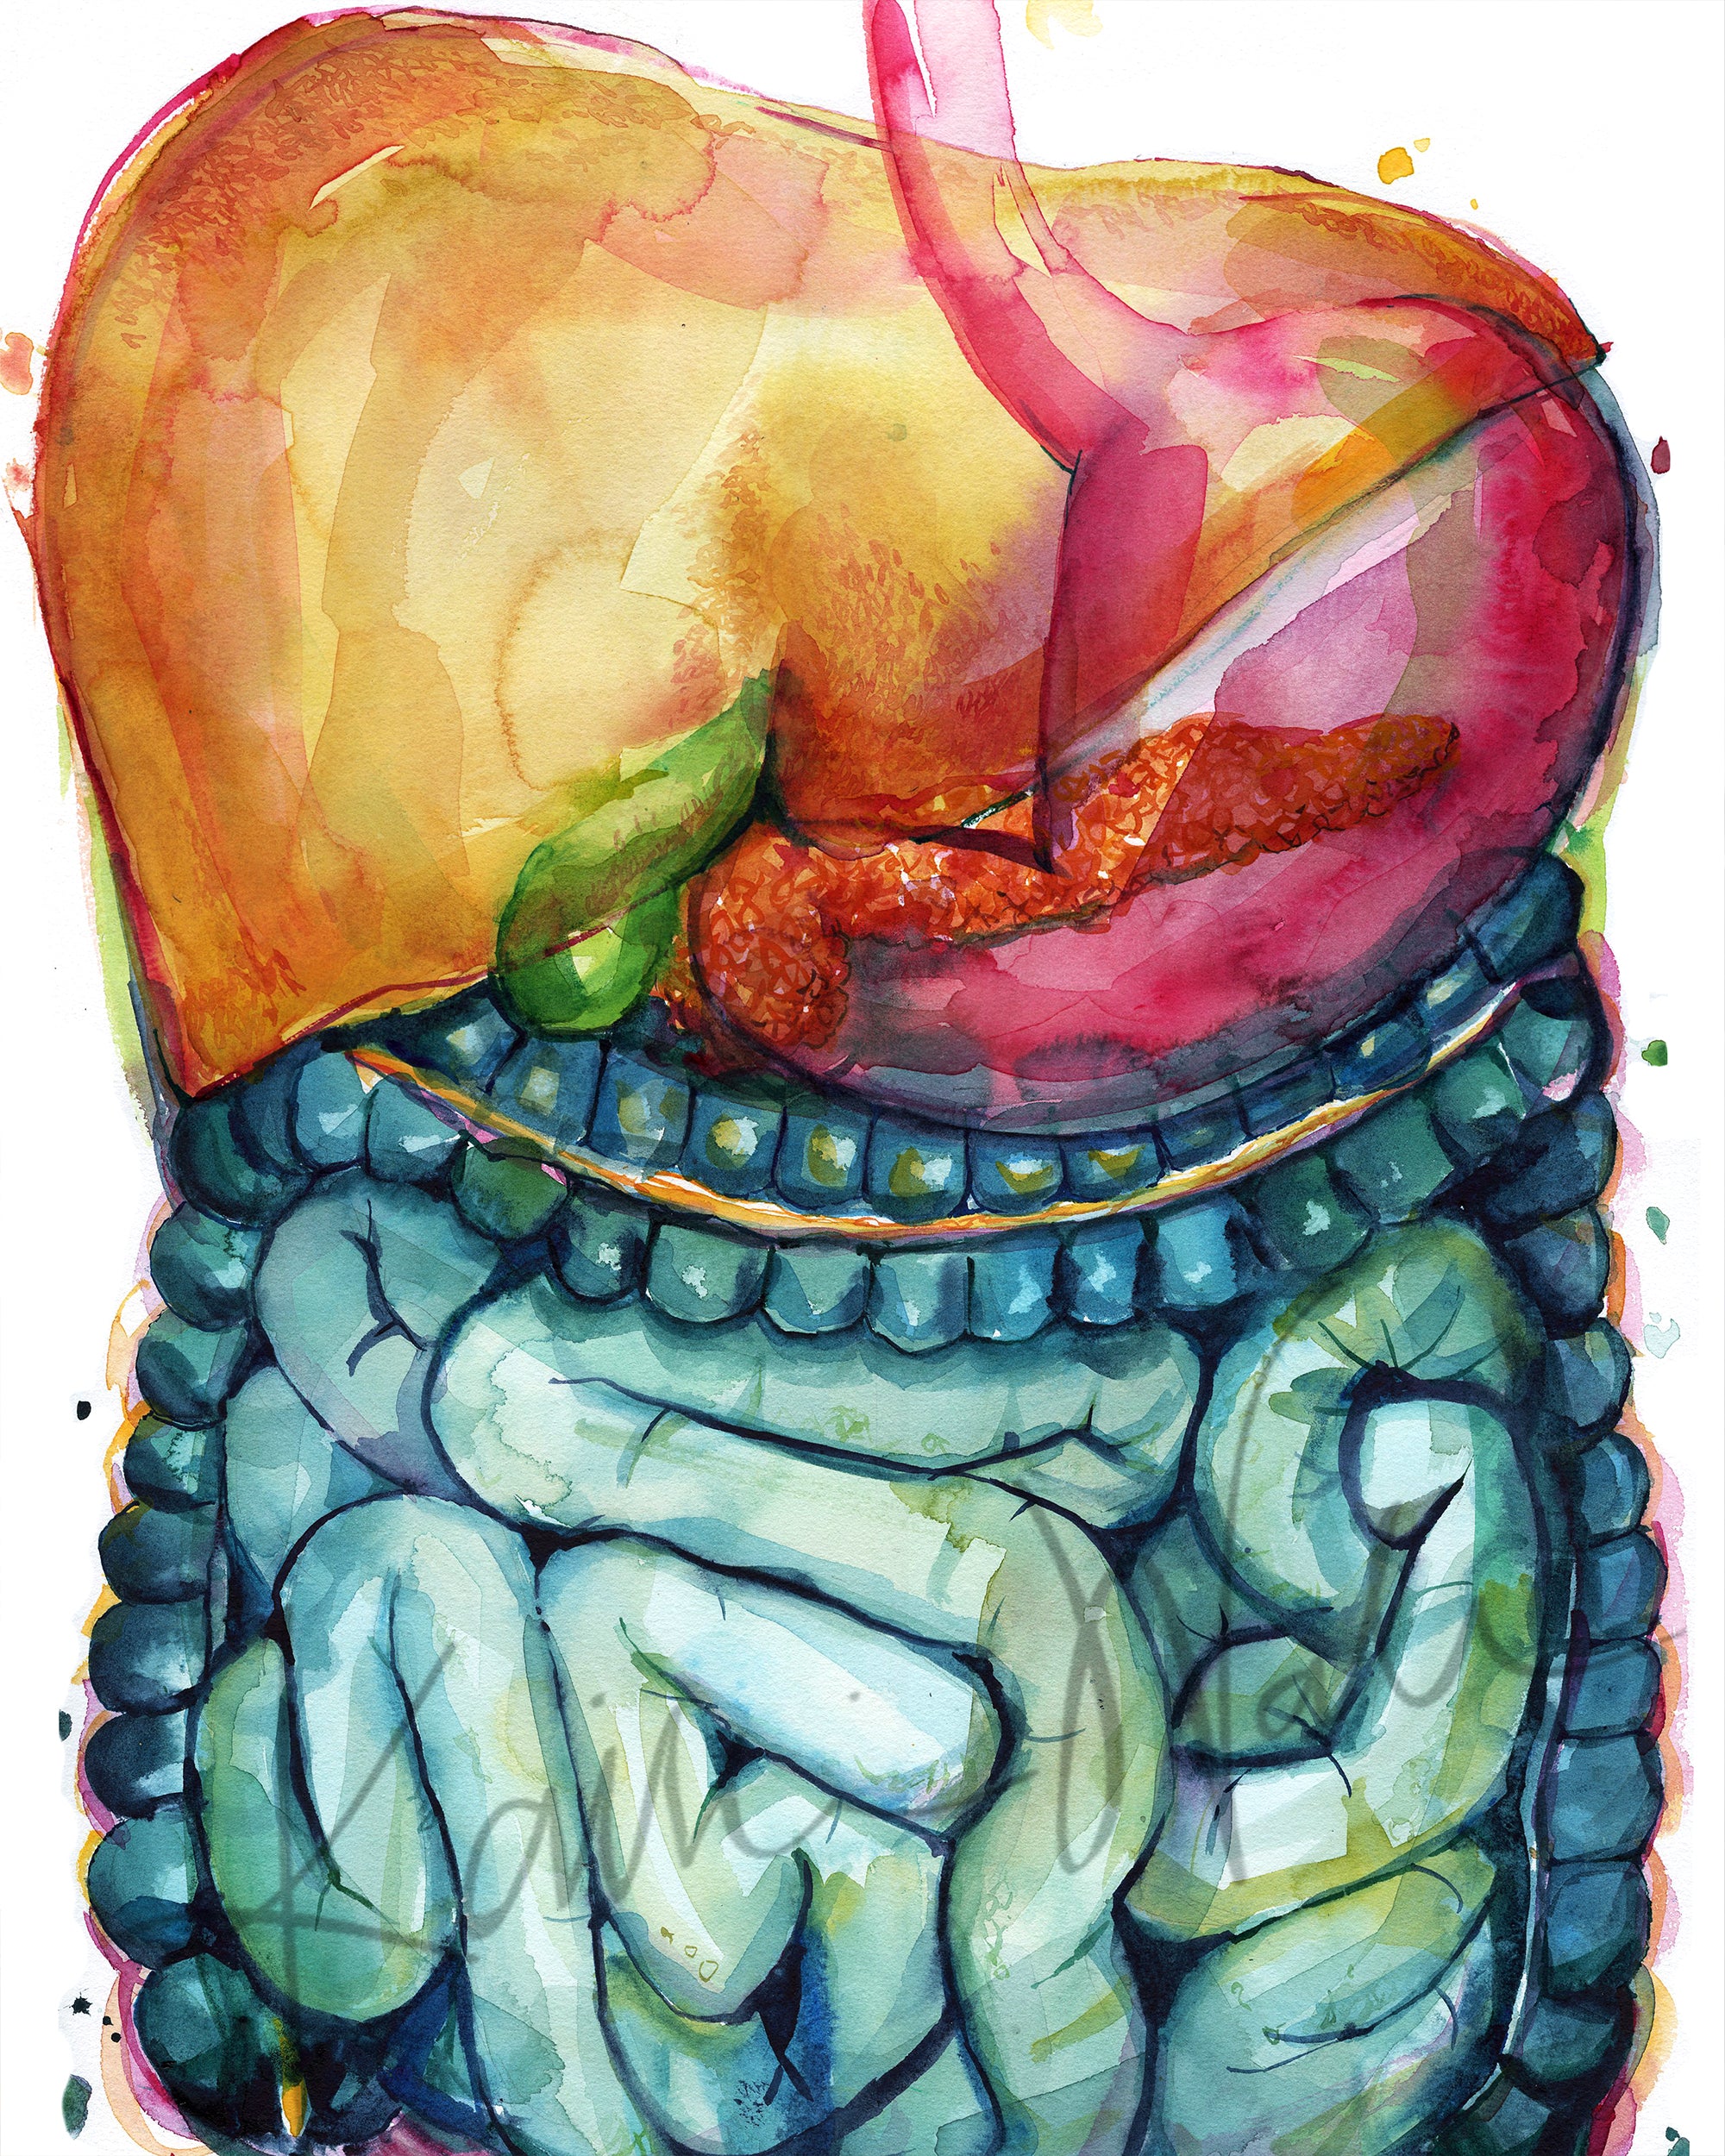  Unframed watercolor painting of the gastrointestinal system.